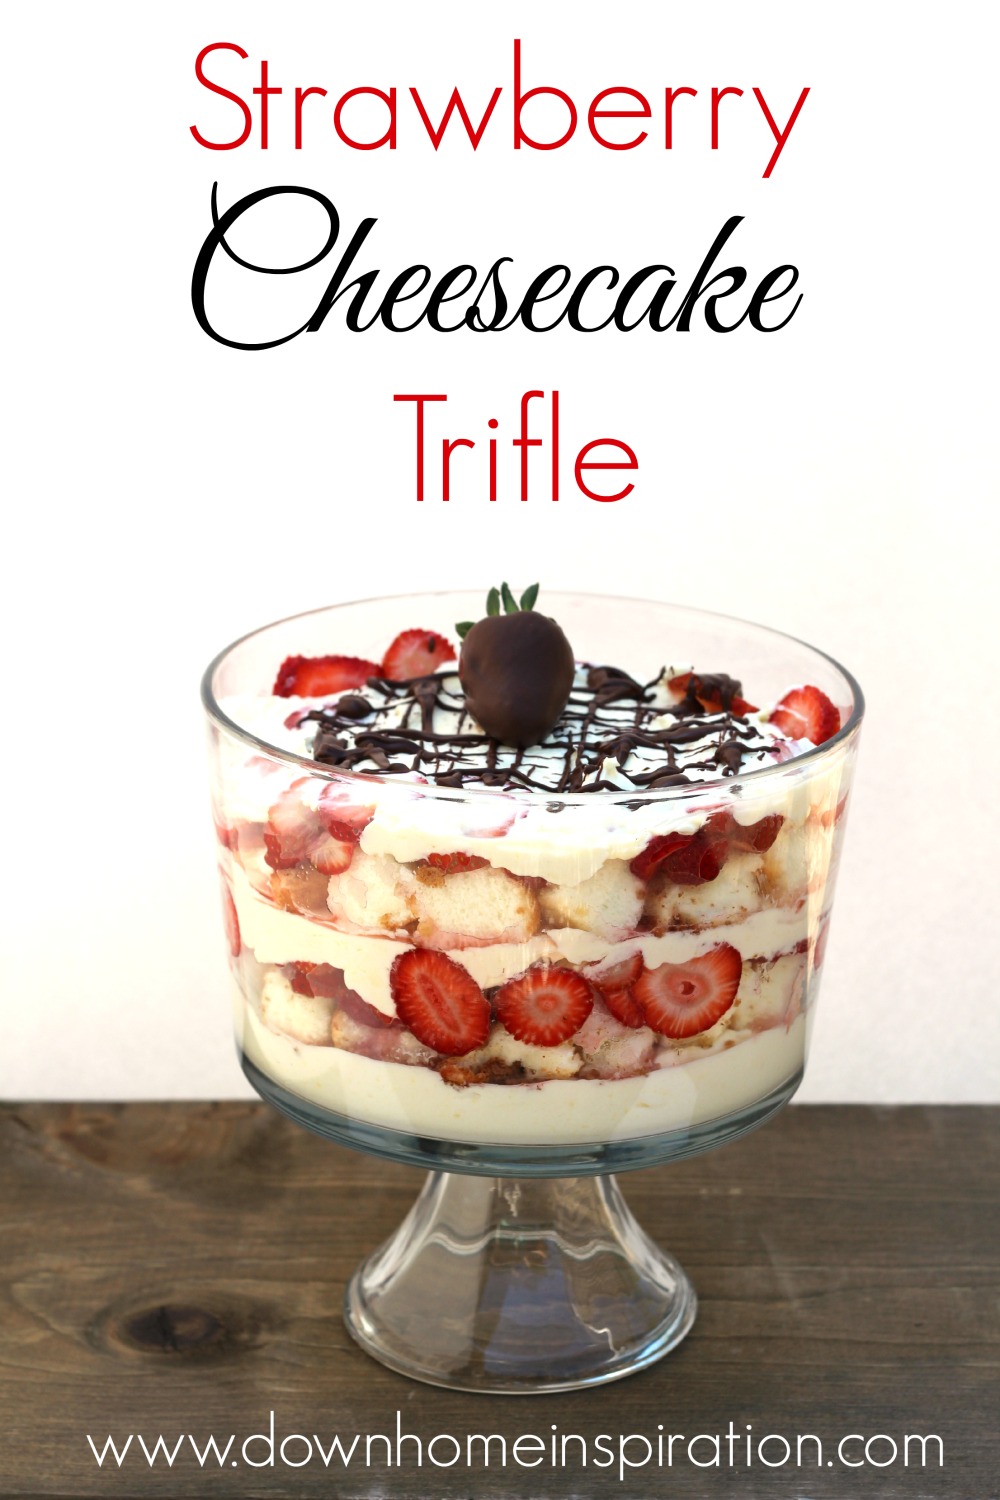 Strawberry Cheesecake Trifle - Down Home Inspiration